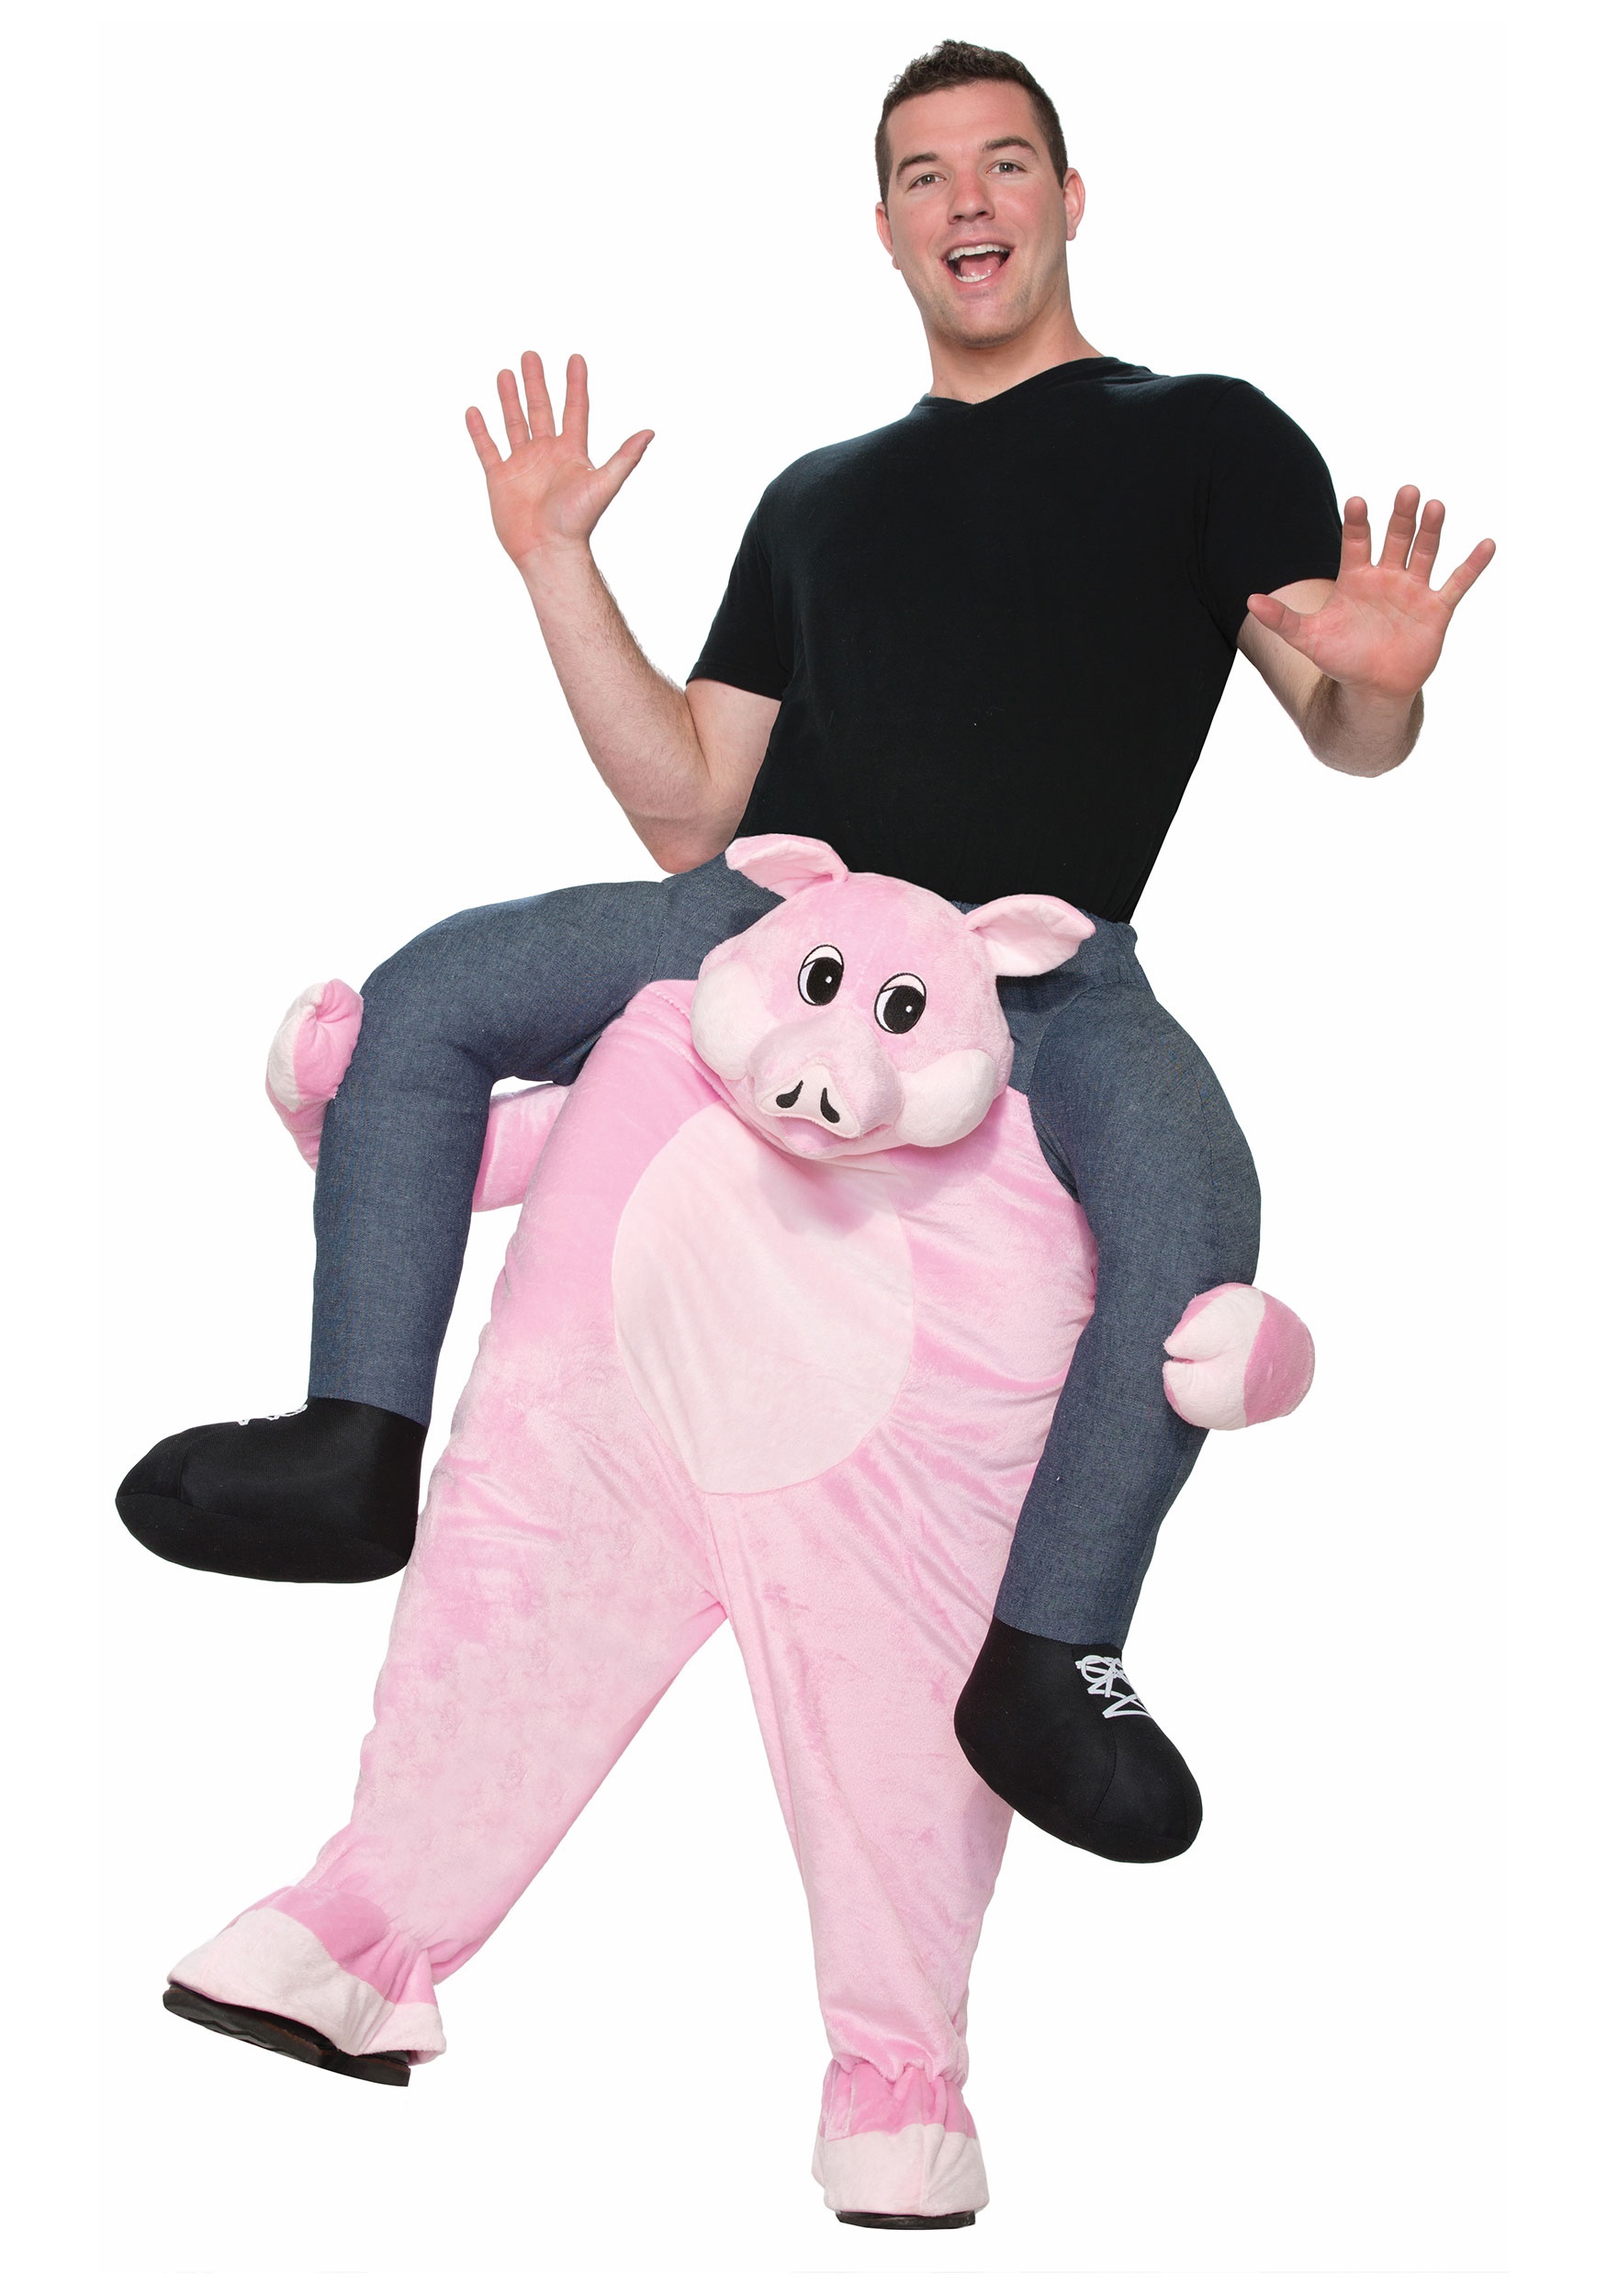 Image of Adult Piggyback Ride On Costume ID FO77790-ST